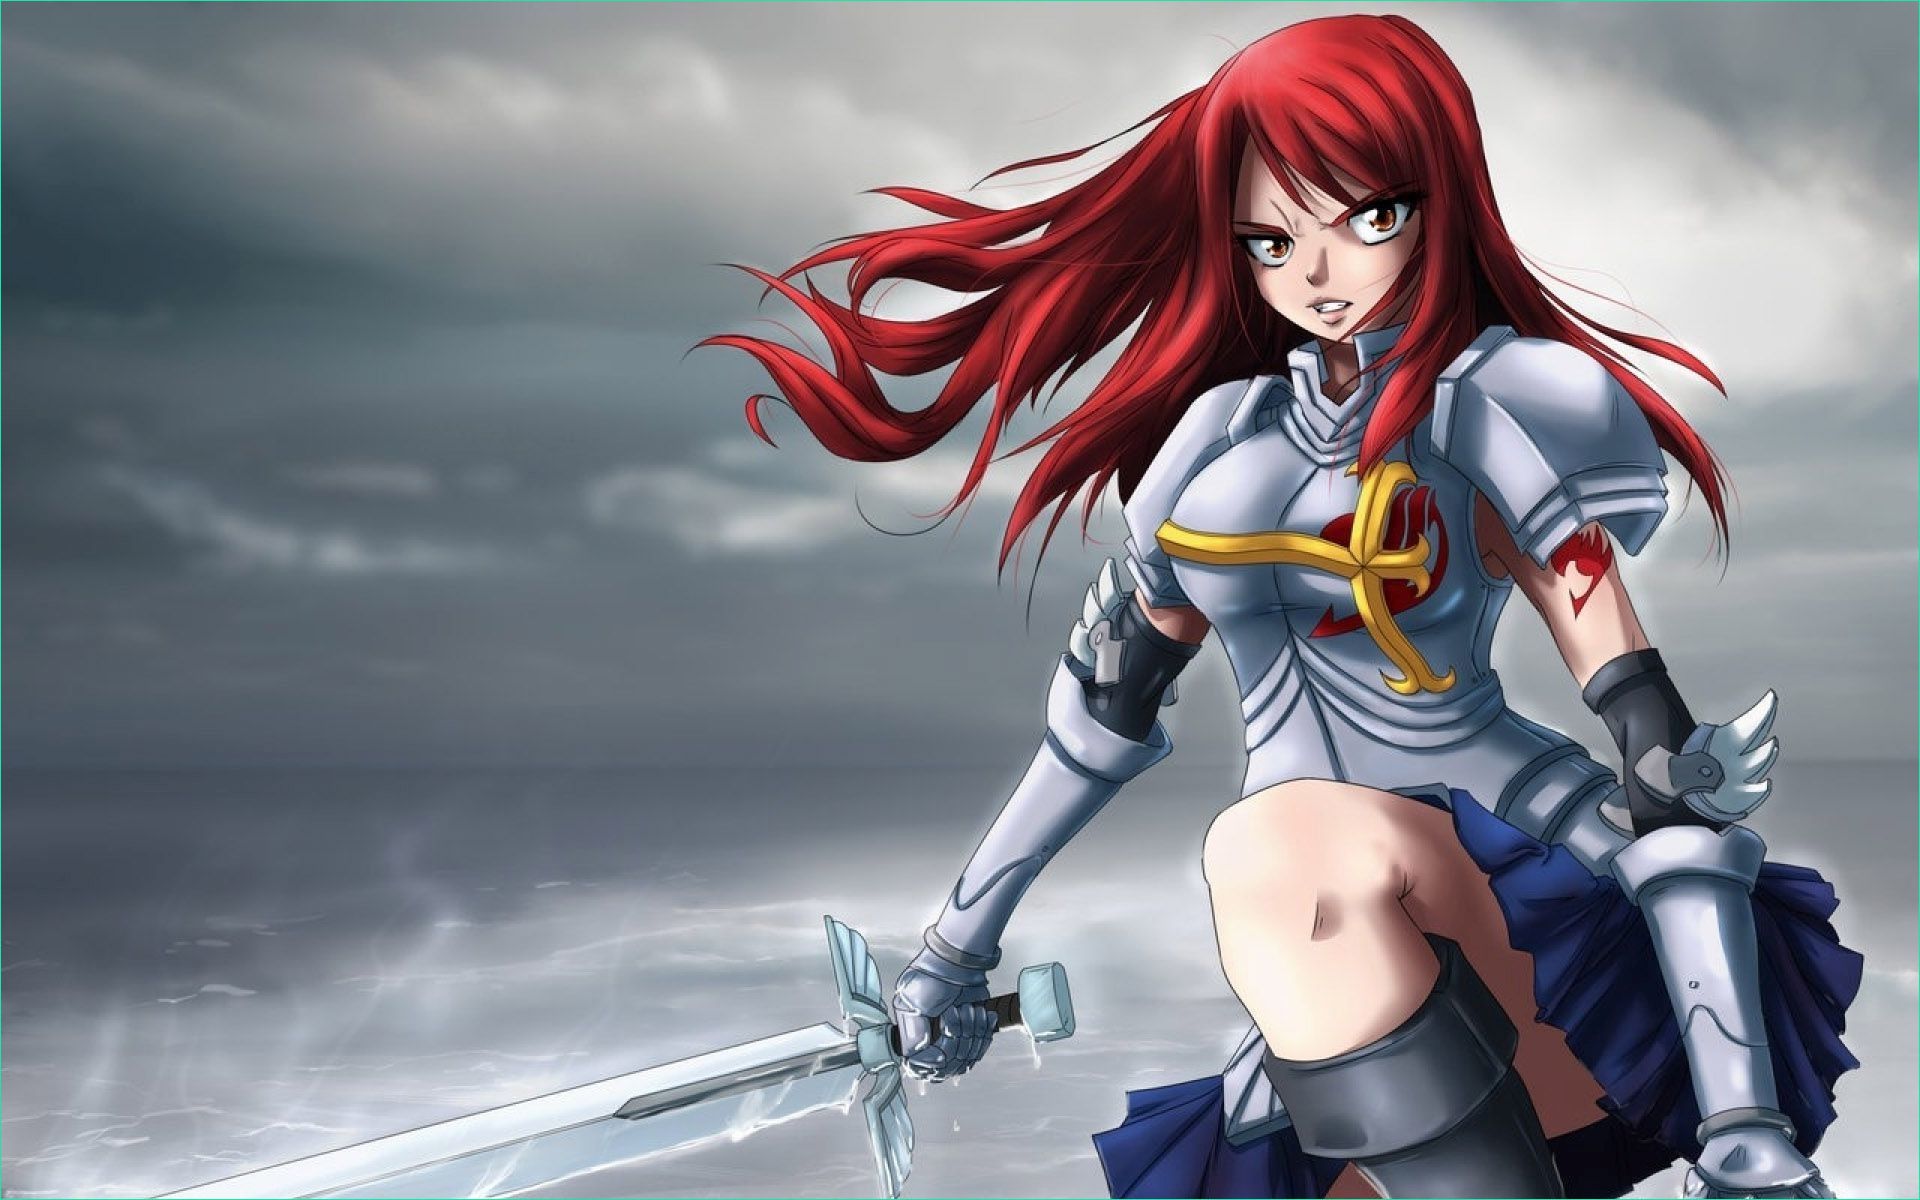 Fairy Tail Erza Impressionnant Images Erza Scarlet Wallpaper 75 Images